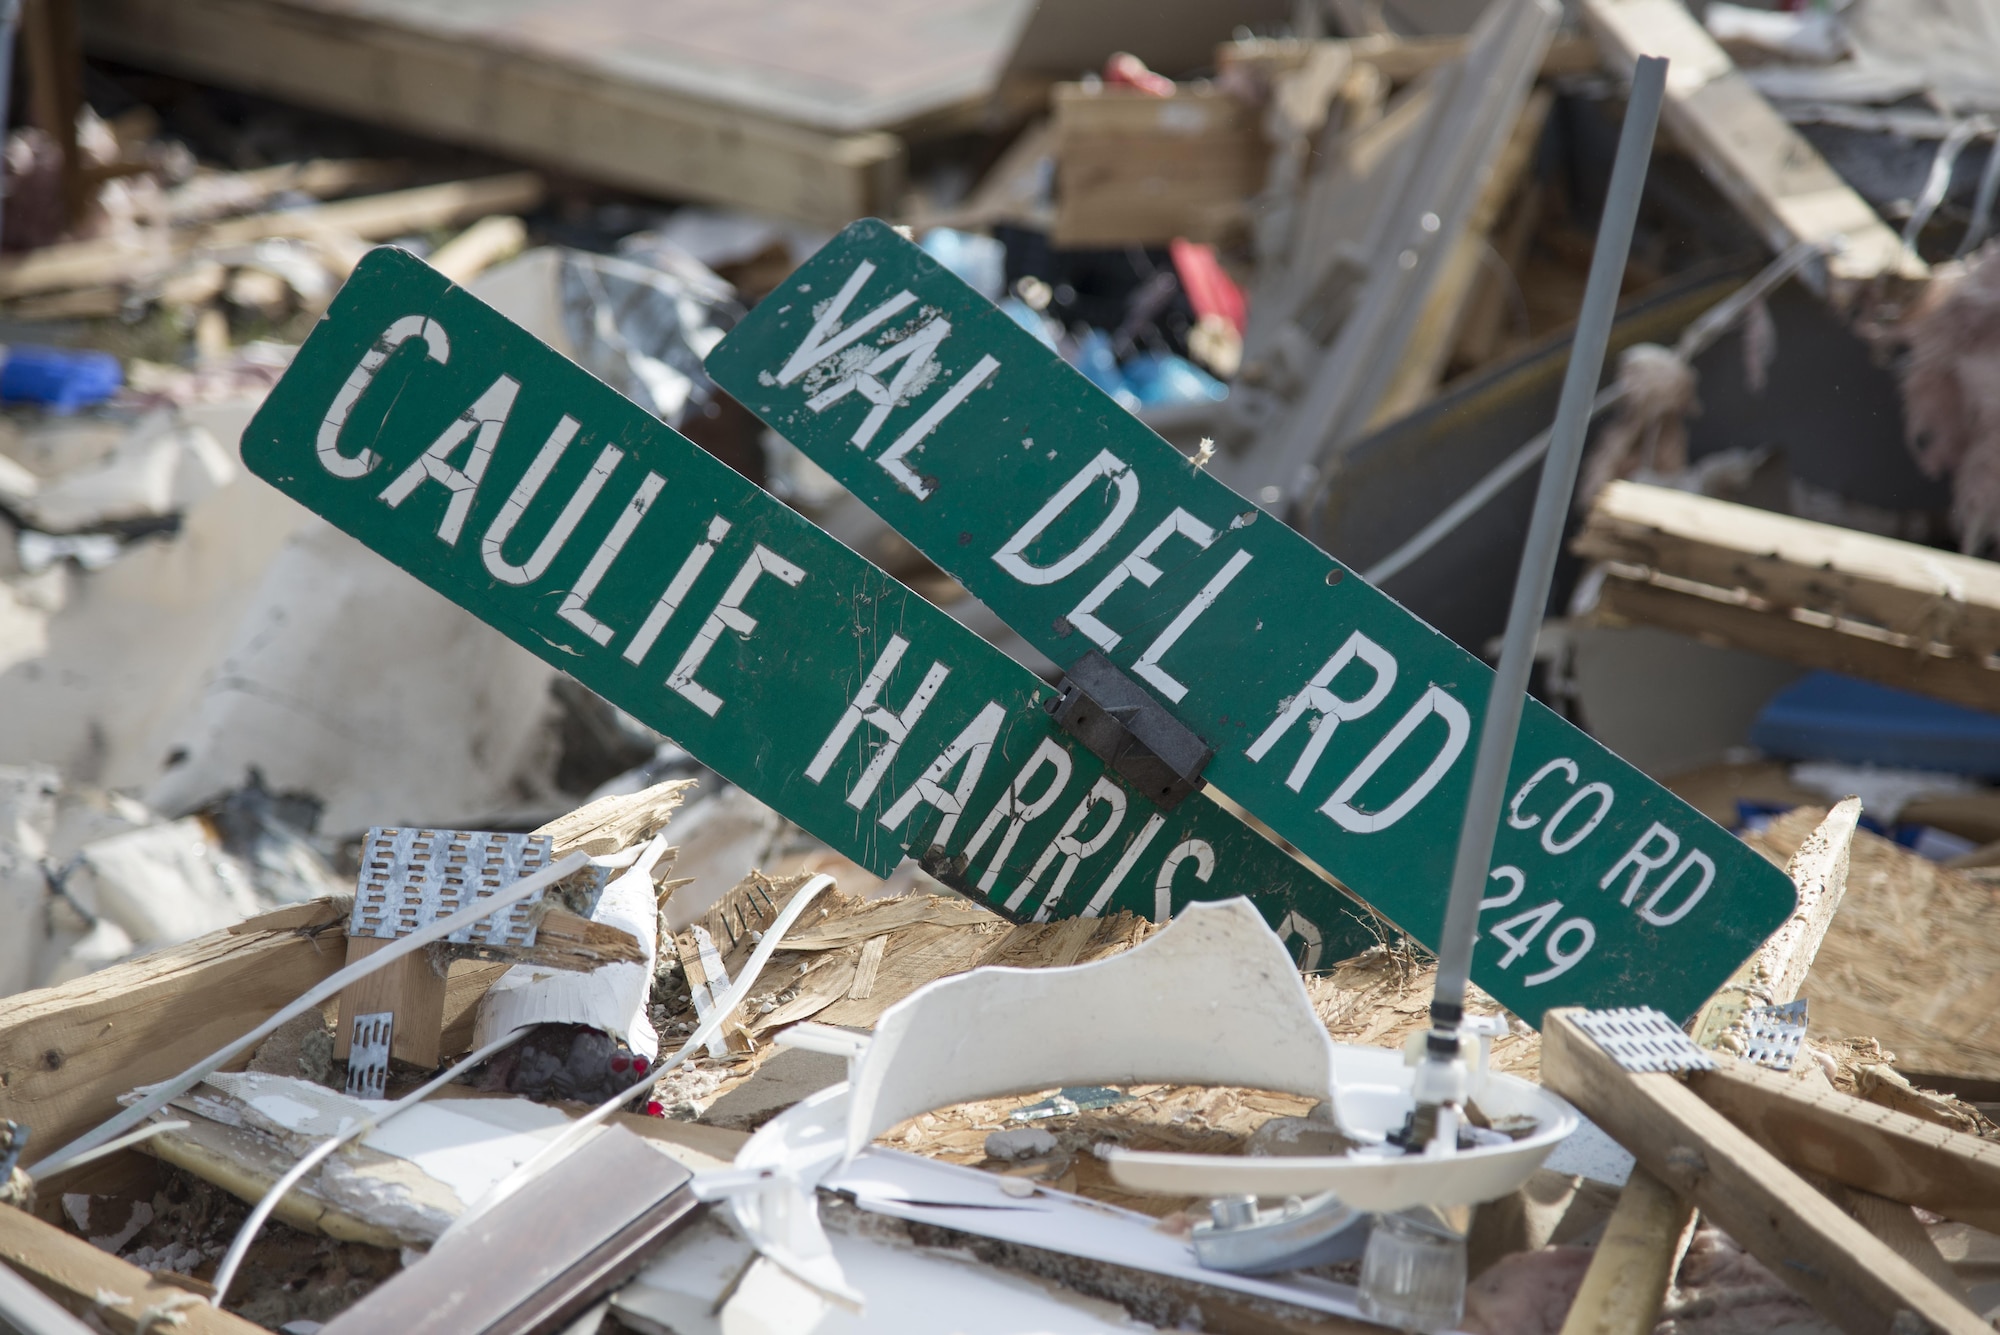 A road sign lays amongst the remains of the homes destroyed by a tornado, Jan. 28, 2017, in Adel, Ga. The tornado killed 15 people and was later deemed an EF3, the strongest tornado to touch down in the county’s history. (U.S. Air Force photo by 2d Lt. Kaitlin Toner)